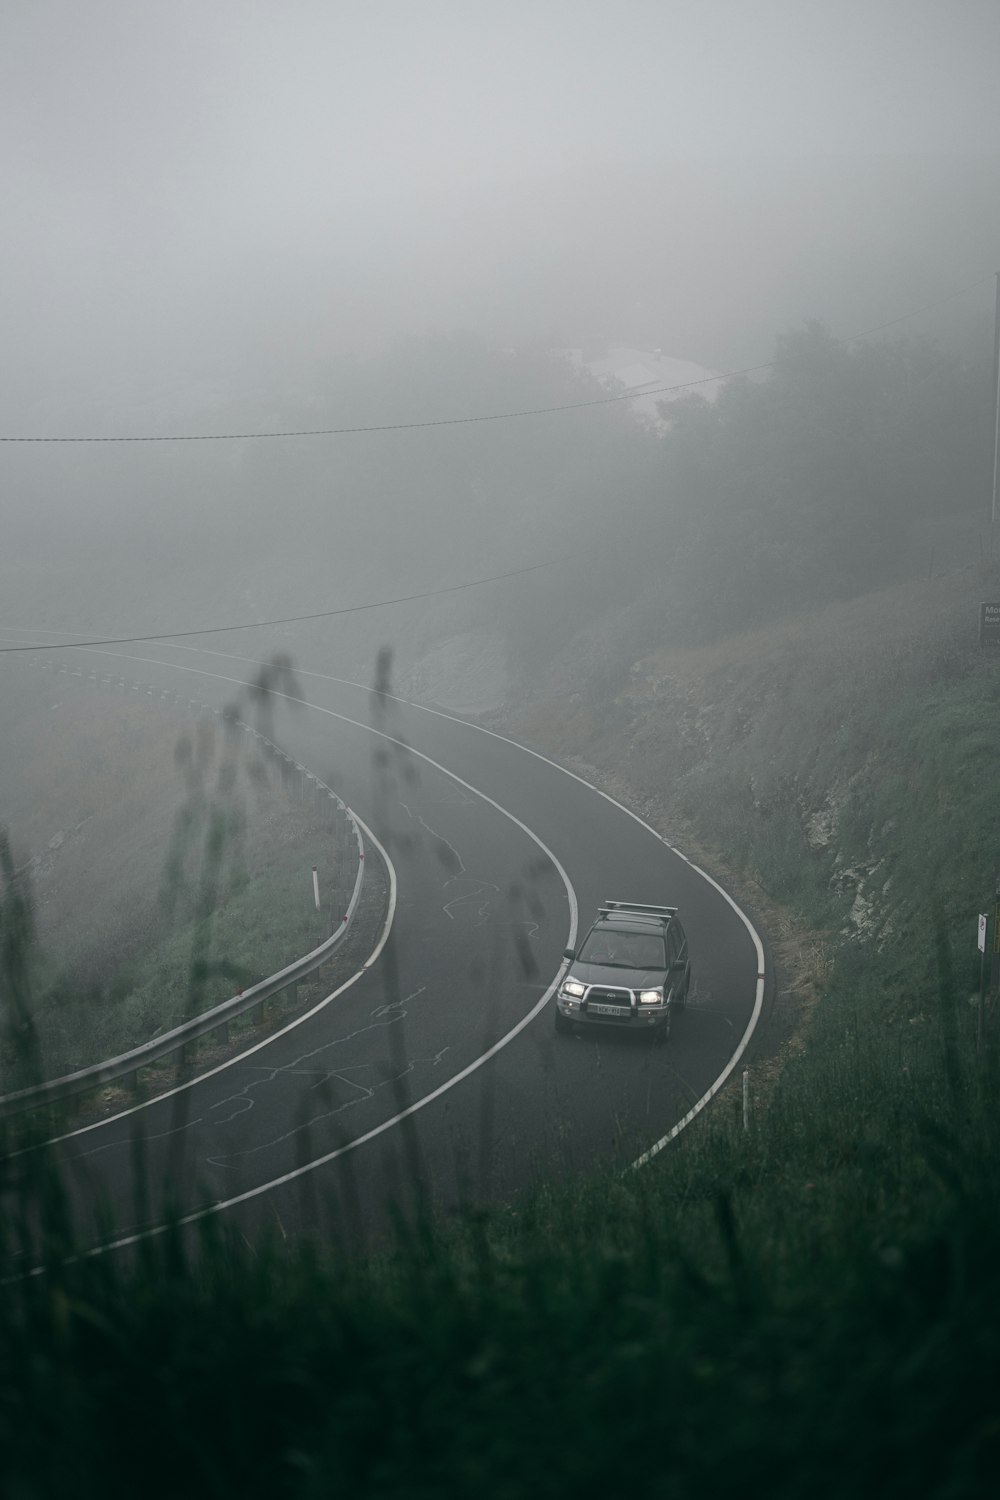 cars on road between green grass field during foggy weather